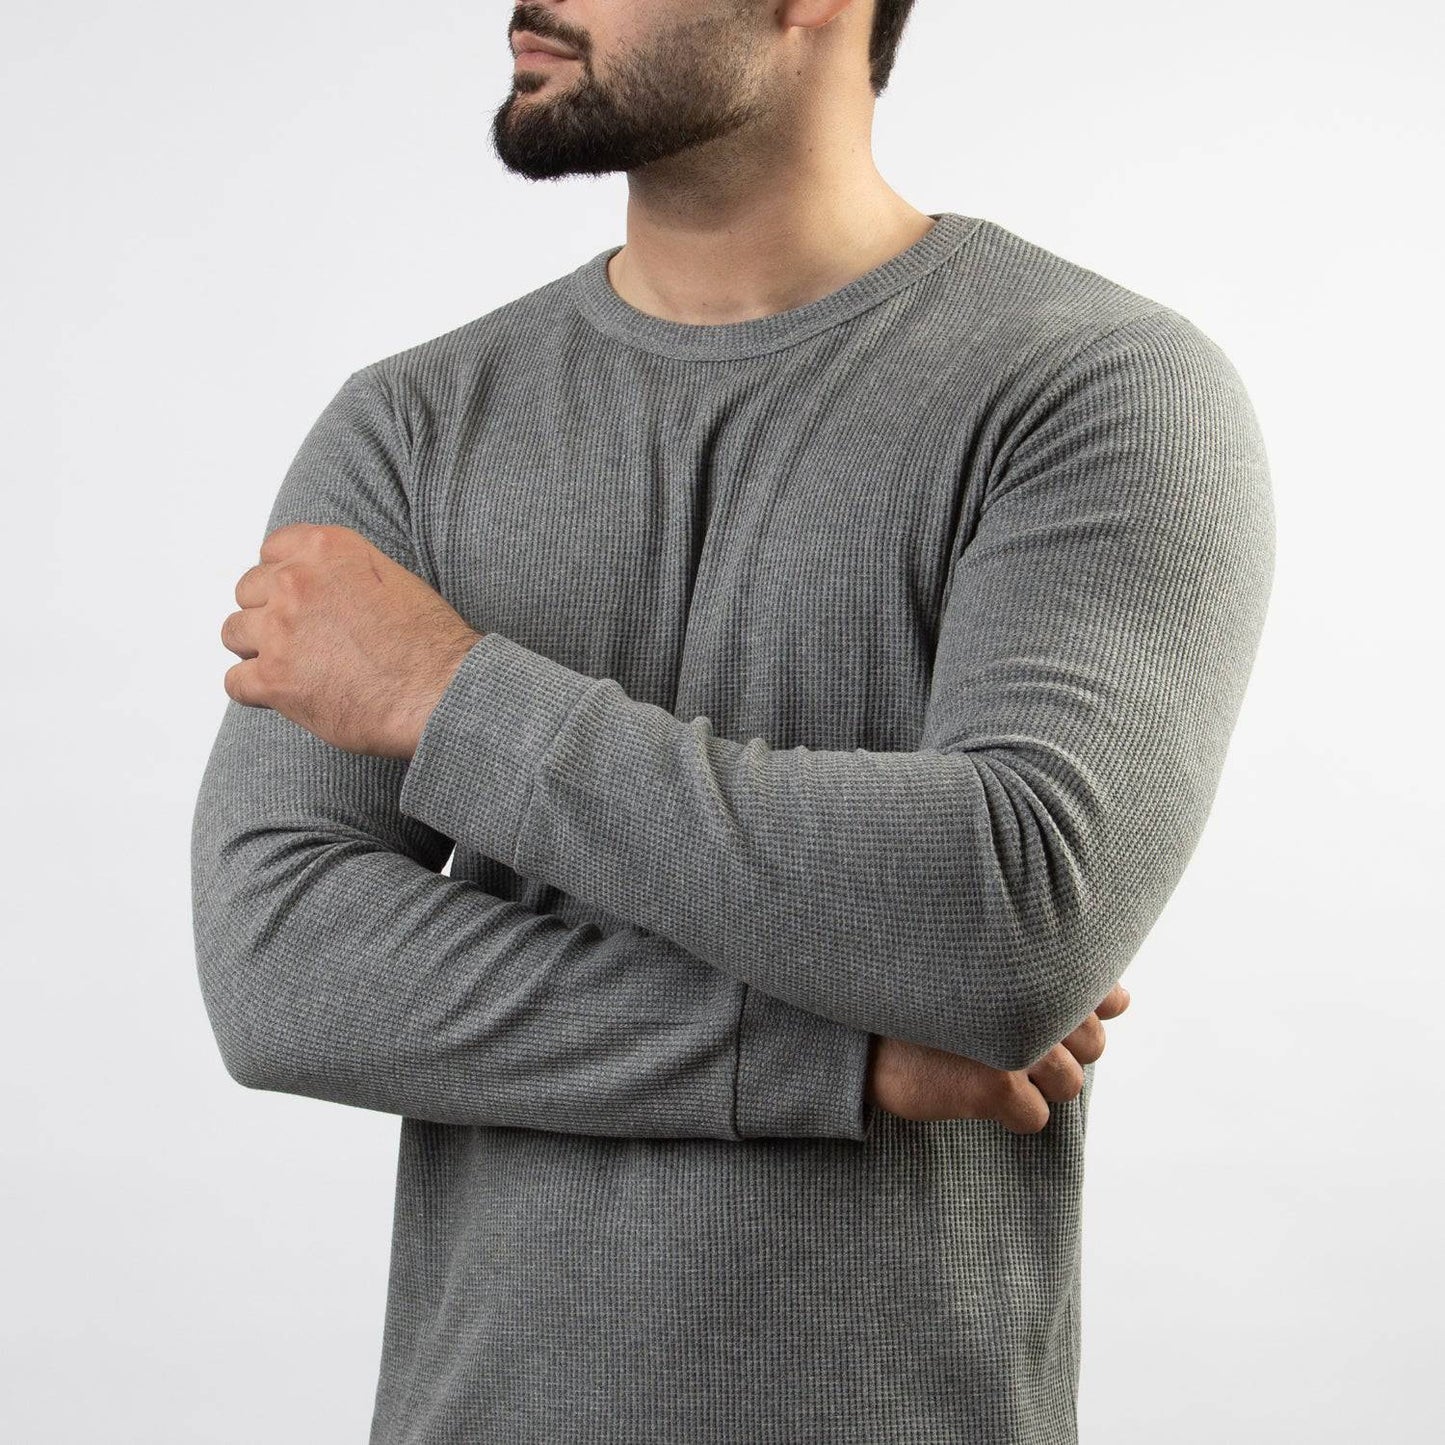 Gray Thermal Full Sleeves Waffle-Knit - Valetica Sports